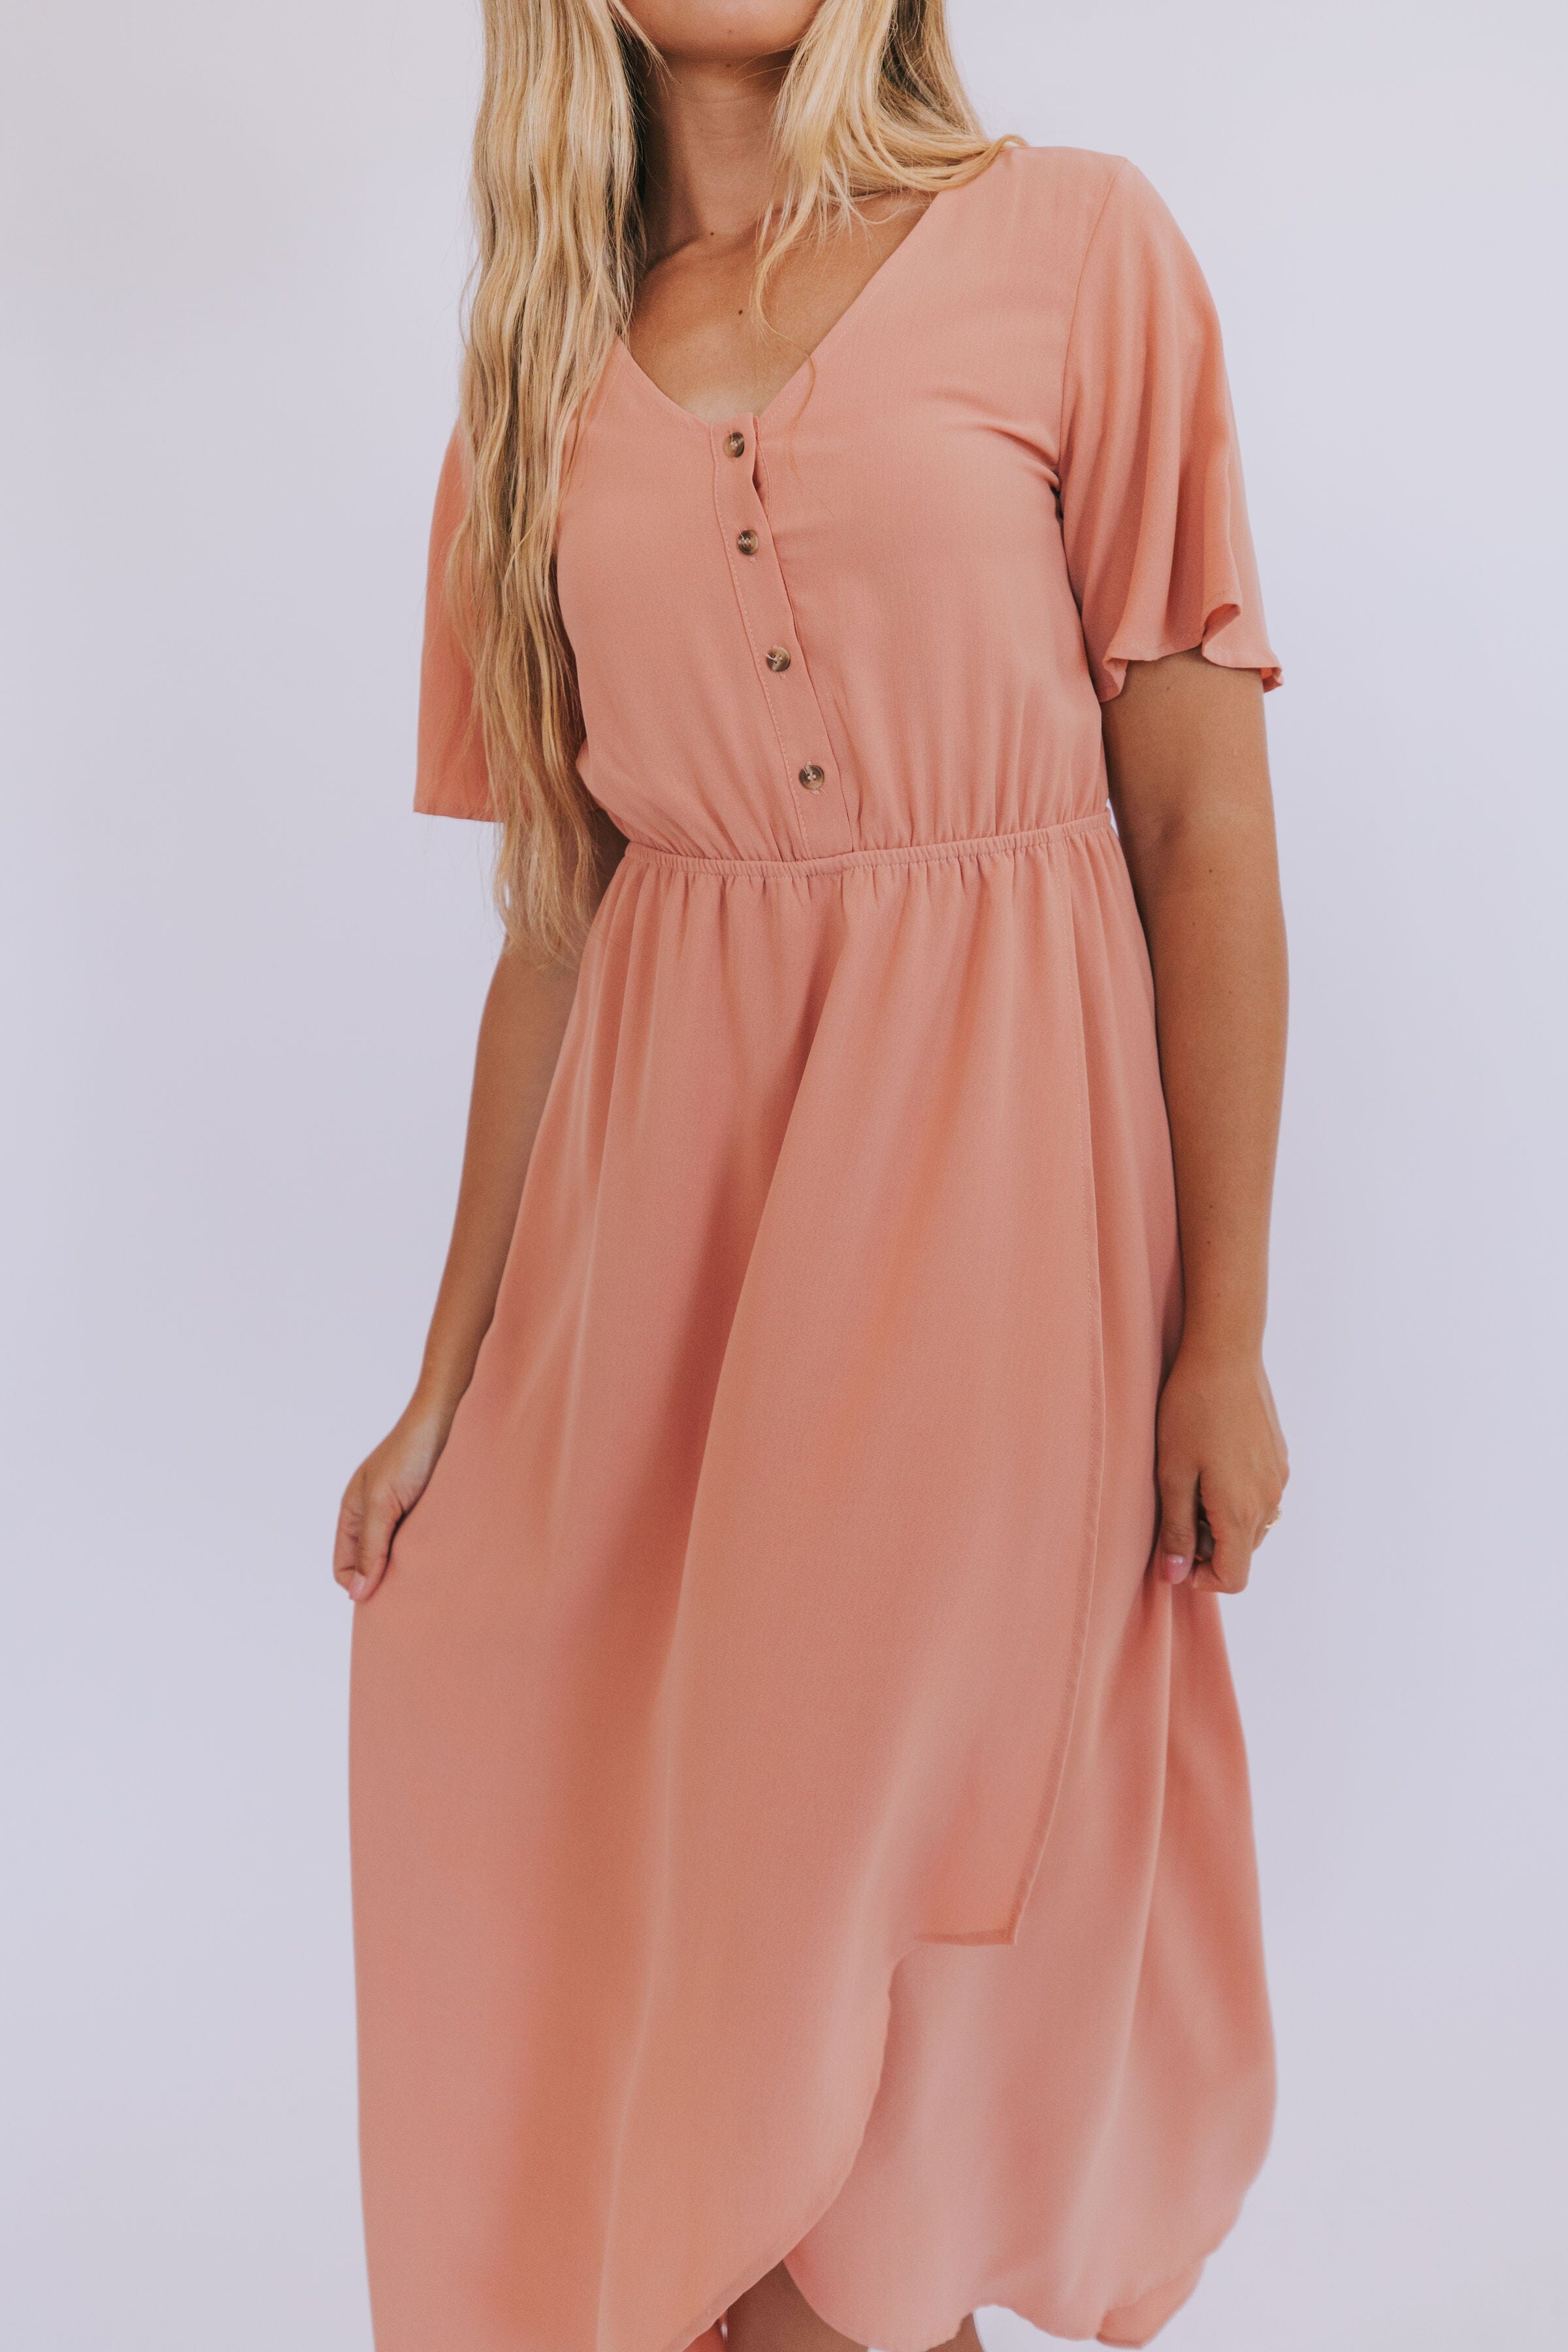 ONE LOVED BABE - Windsor Dress - 11 Colors 